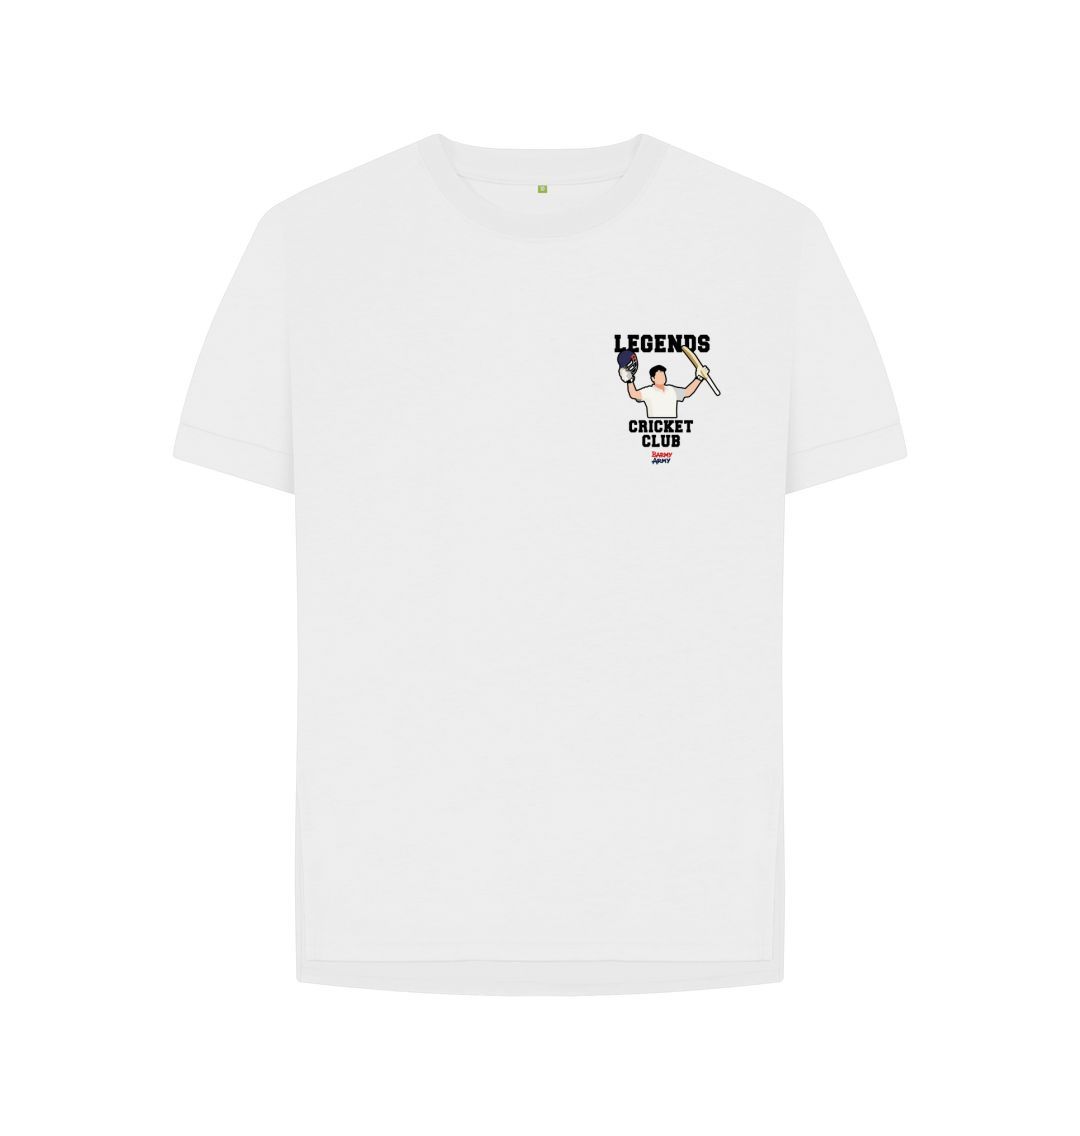 White Barmy Army Legends Cricket Club Ladies Tee - Cook